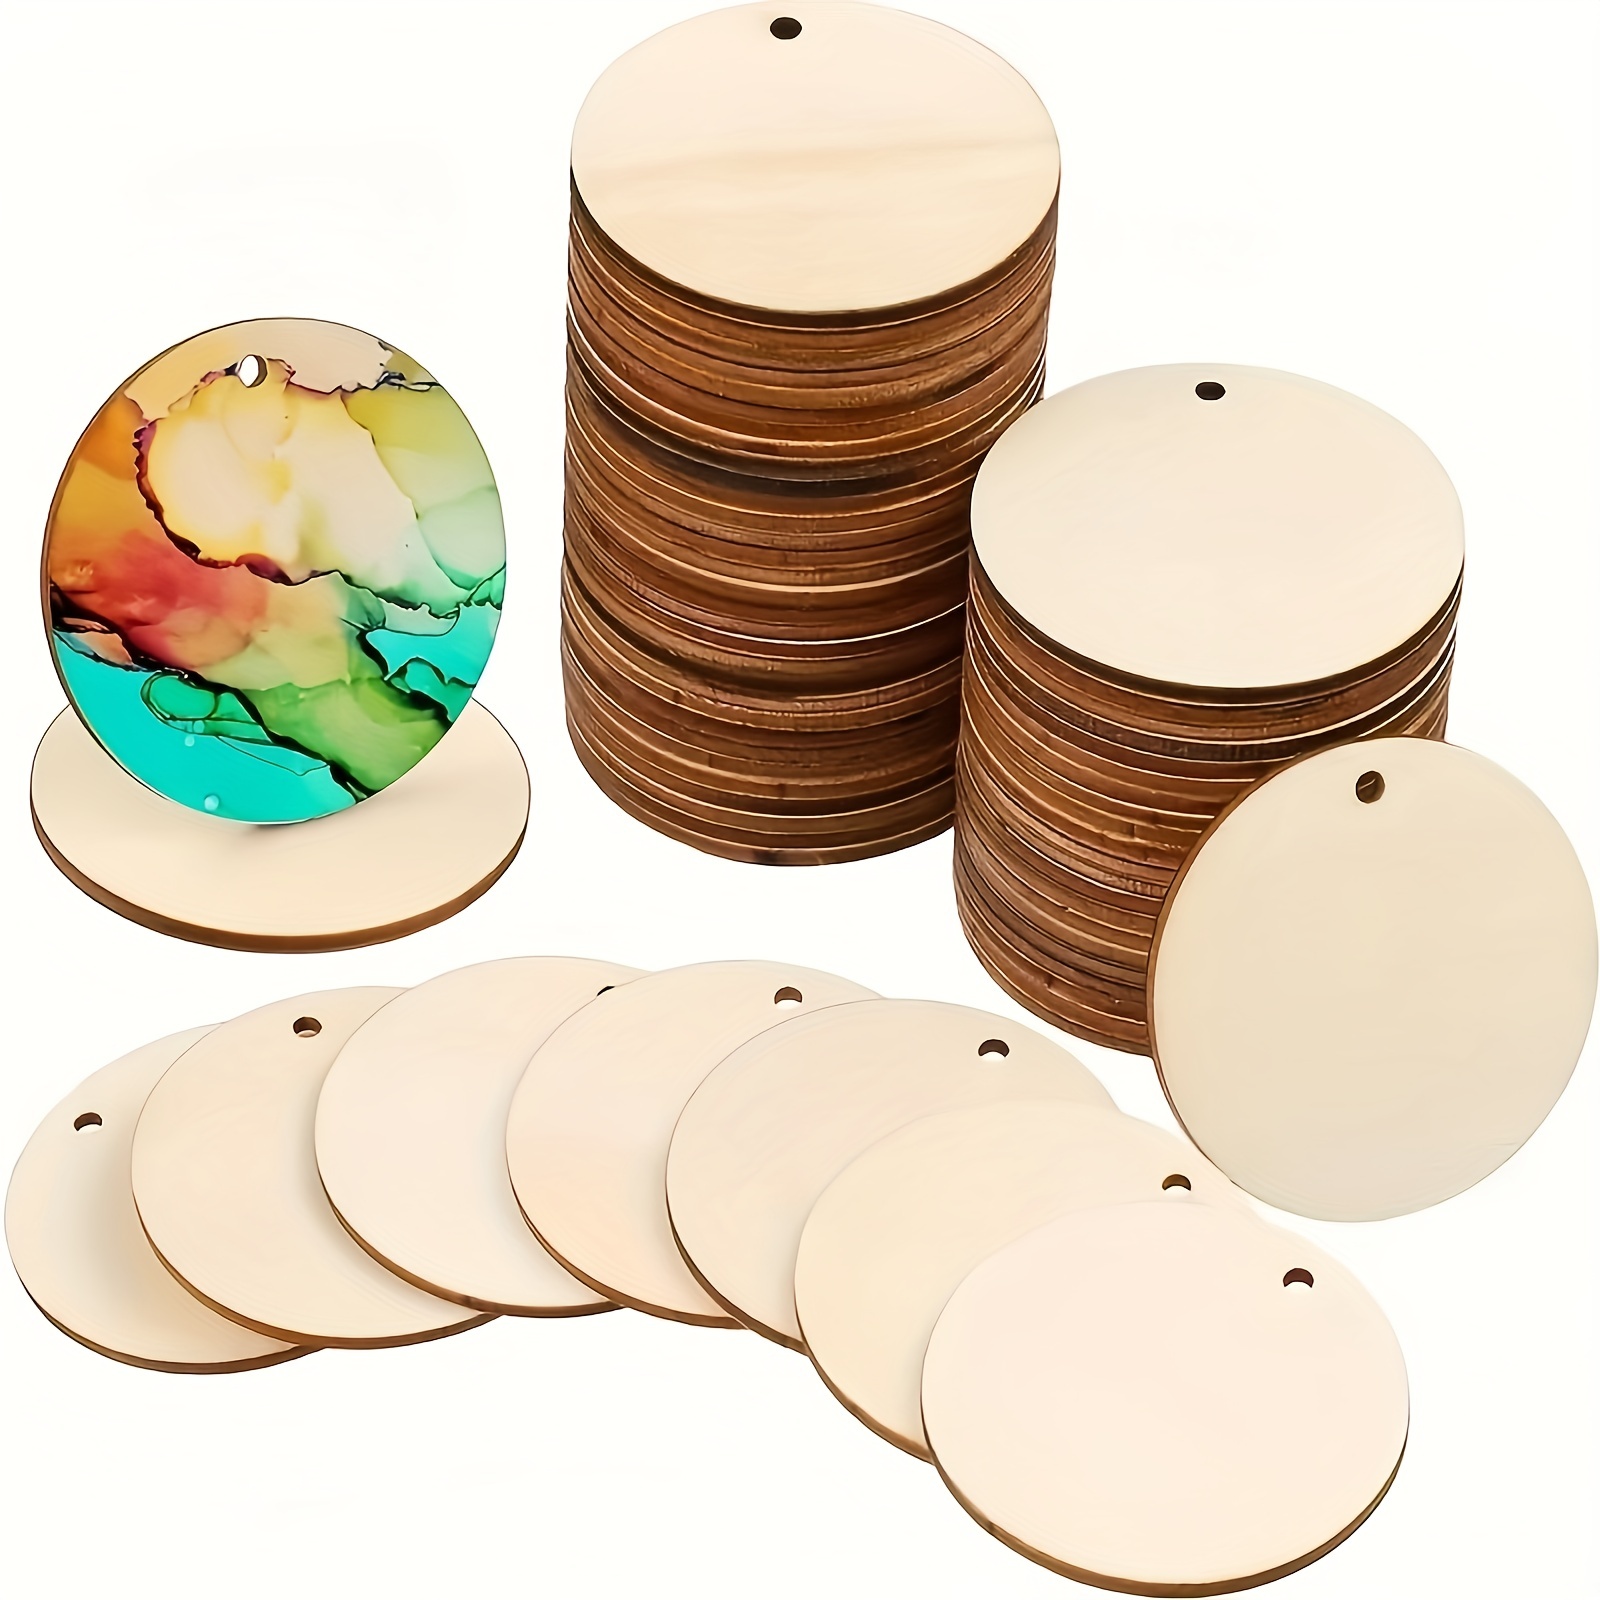 50PCS 25MM Round Wood Discs for Crafts Blank Unfinished Wood